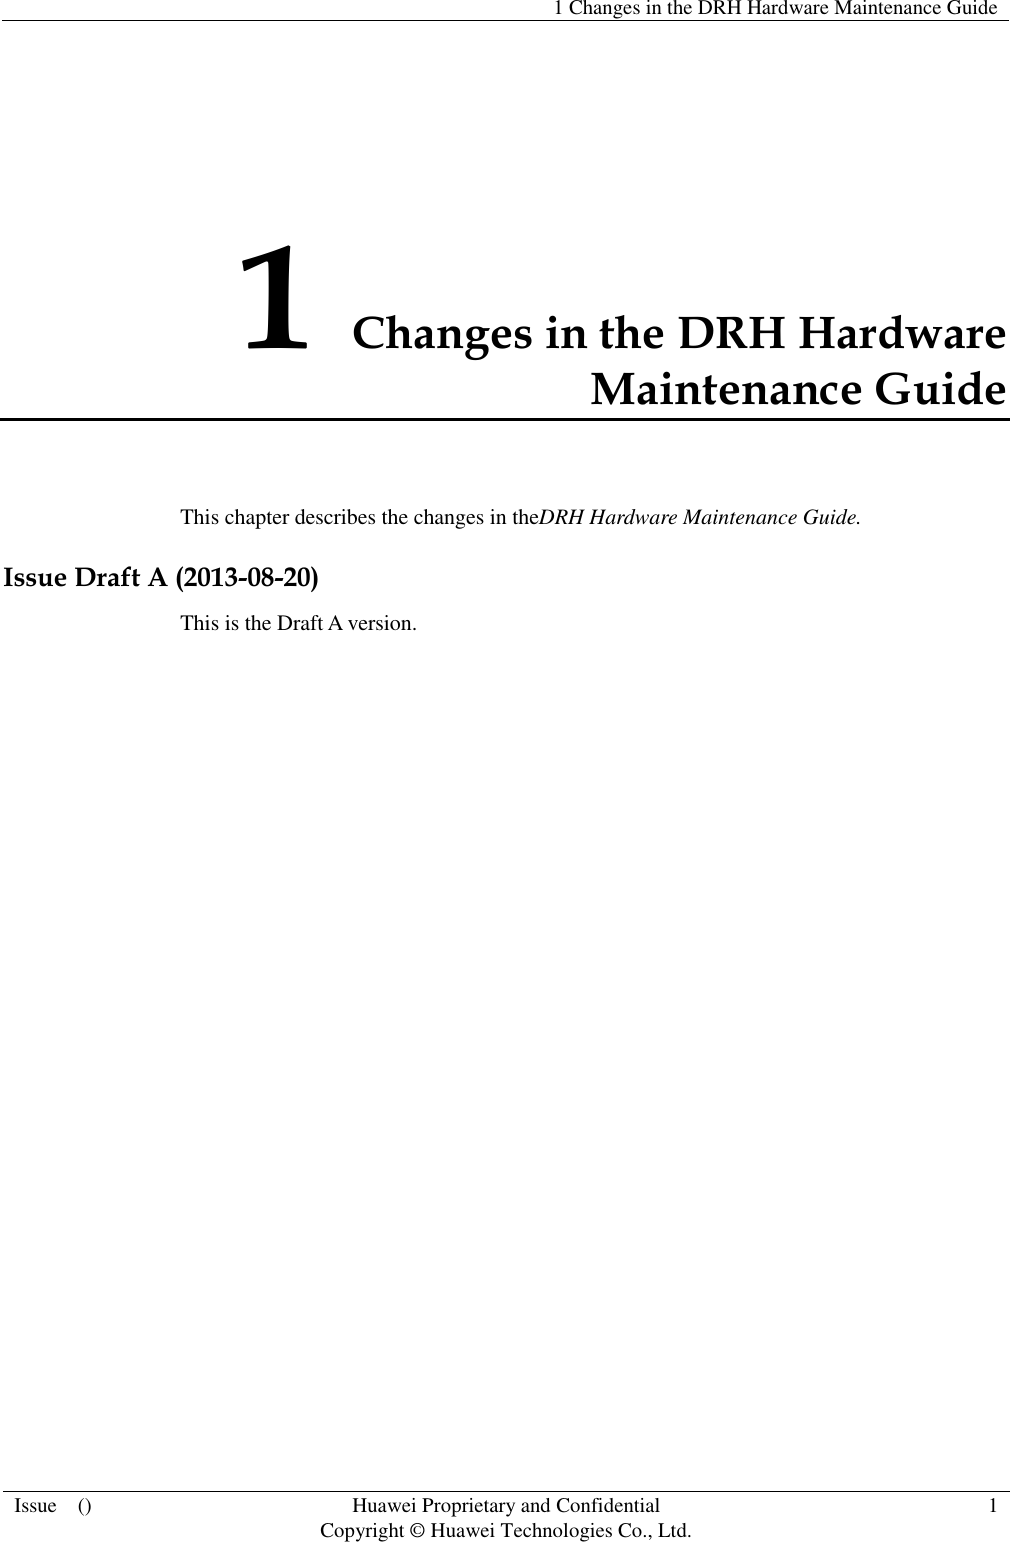   1 Changes in the DRH Hardware Maintenance Guide  Issue    () Huawei Proprietary and Confidential                                     Copyright © Huawei Technologies Co., Ltd. 1  1 Changes in the DRH Hardware Maintenance Guide This chapter describes the changes in theDRH Hardware Maintenance Guide. Issue Draft A (2013-08-20) This is the Draft A version. 